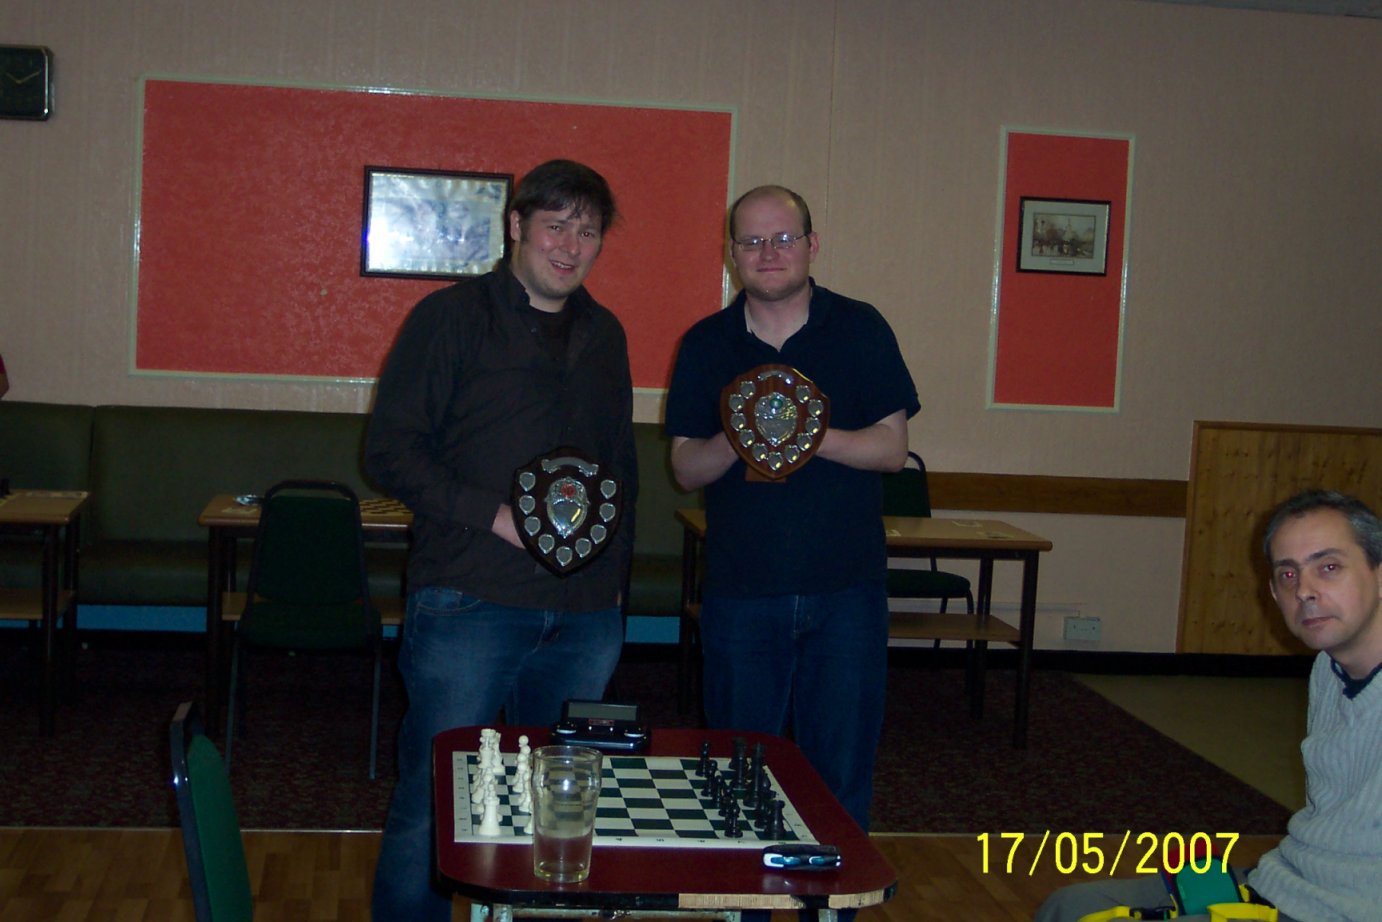 Dominic Bader and Rob Parker, Major and U100 club Blitz 10 winners respectively